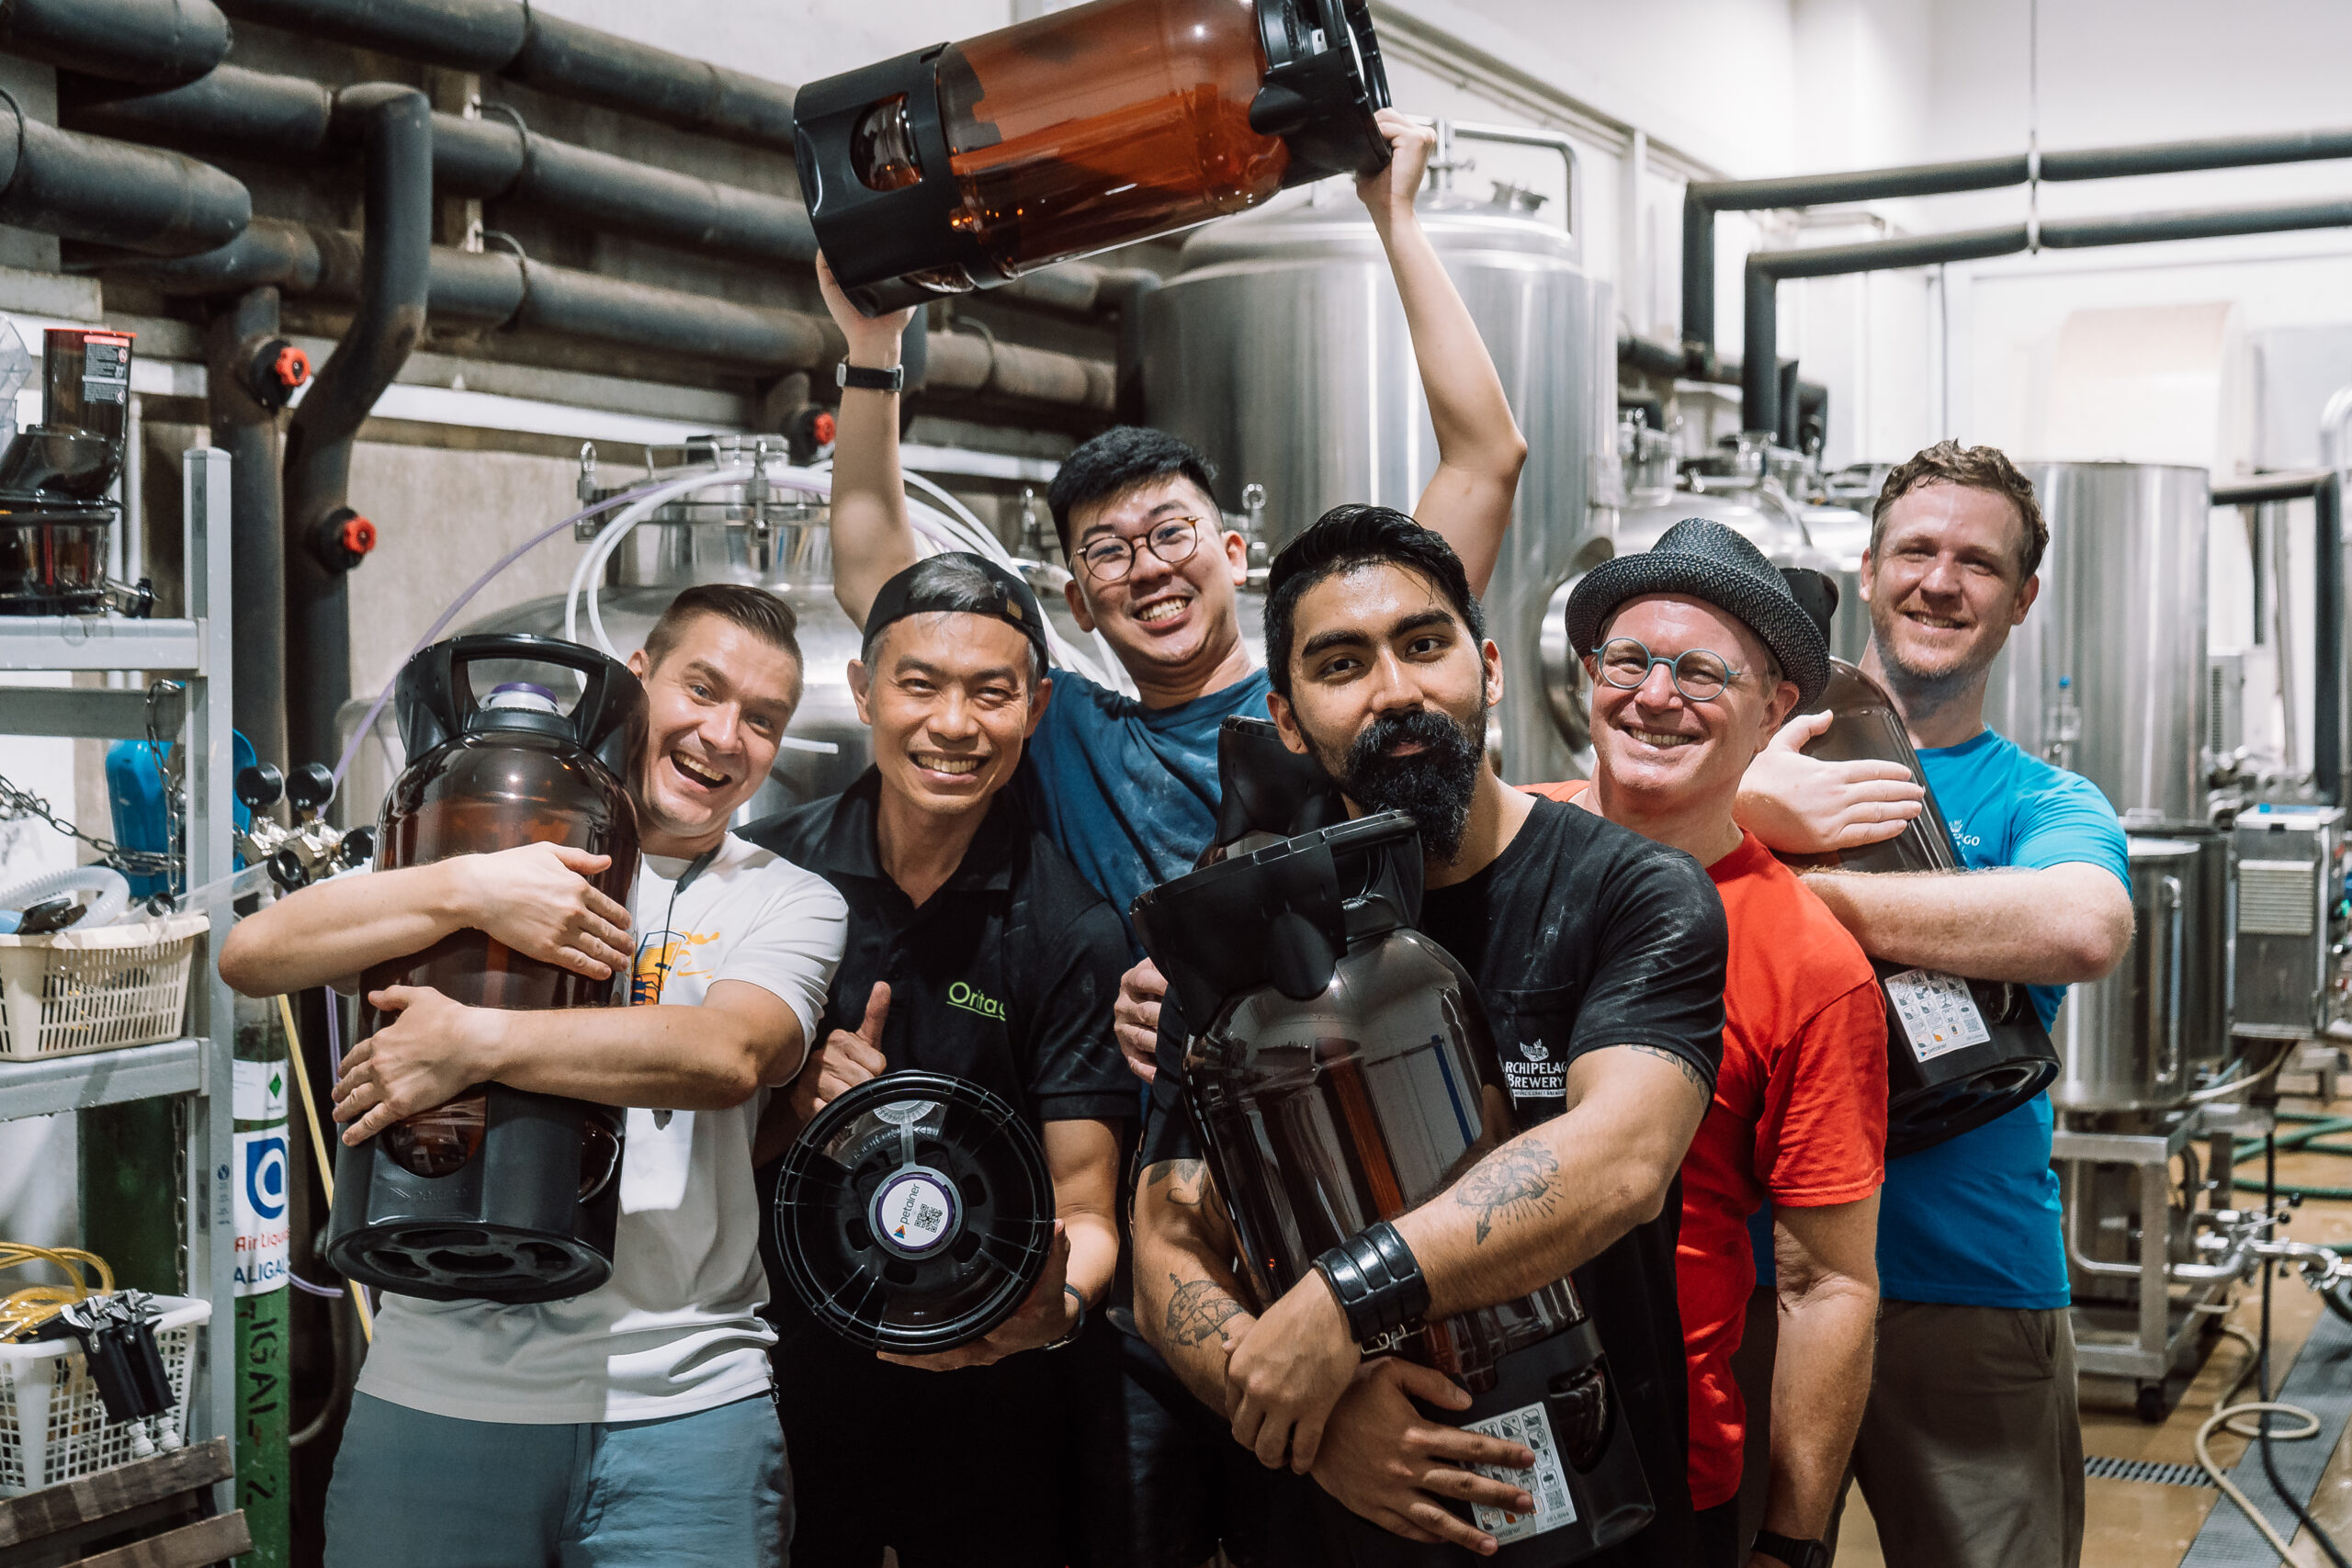 13 brewers from local craft breweries came together to produce the festival’s first collab beer, including (from left to right) Mitch Gribov, Head Brewer of Brewerkz, Arthur Shu, Sales Director of Oritag, Casey Choo, Founder of That Singapore Beer Project, Vagisa Rama, Brewer of Archipelago Brewery, Devin Otto Kimble, Co-founder of Specific Gravity and Michael Montisano, Business Manager of Archipelago Brewery